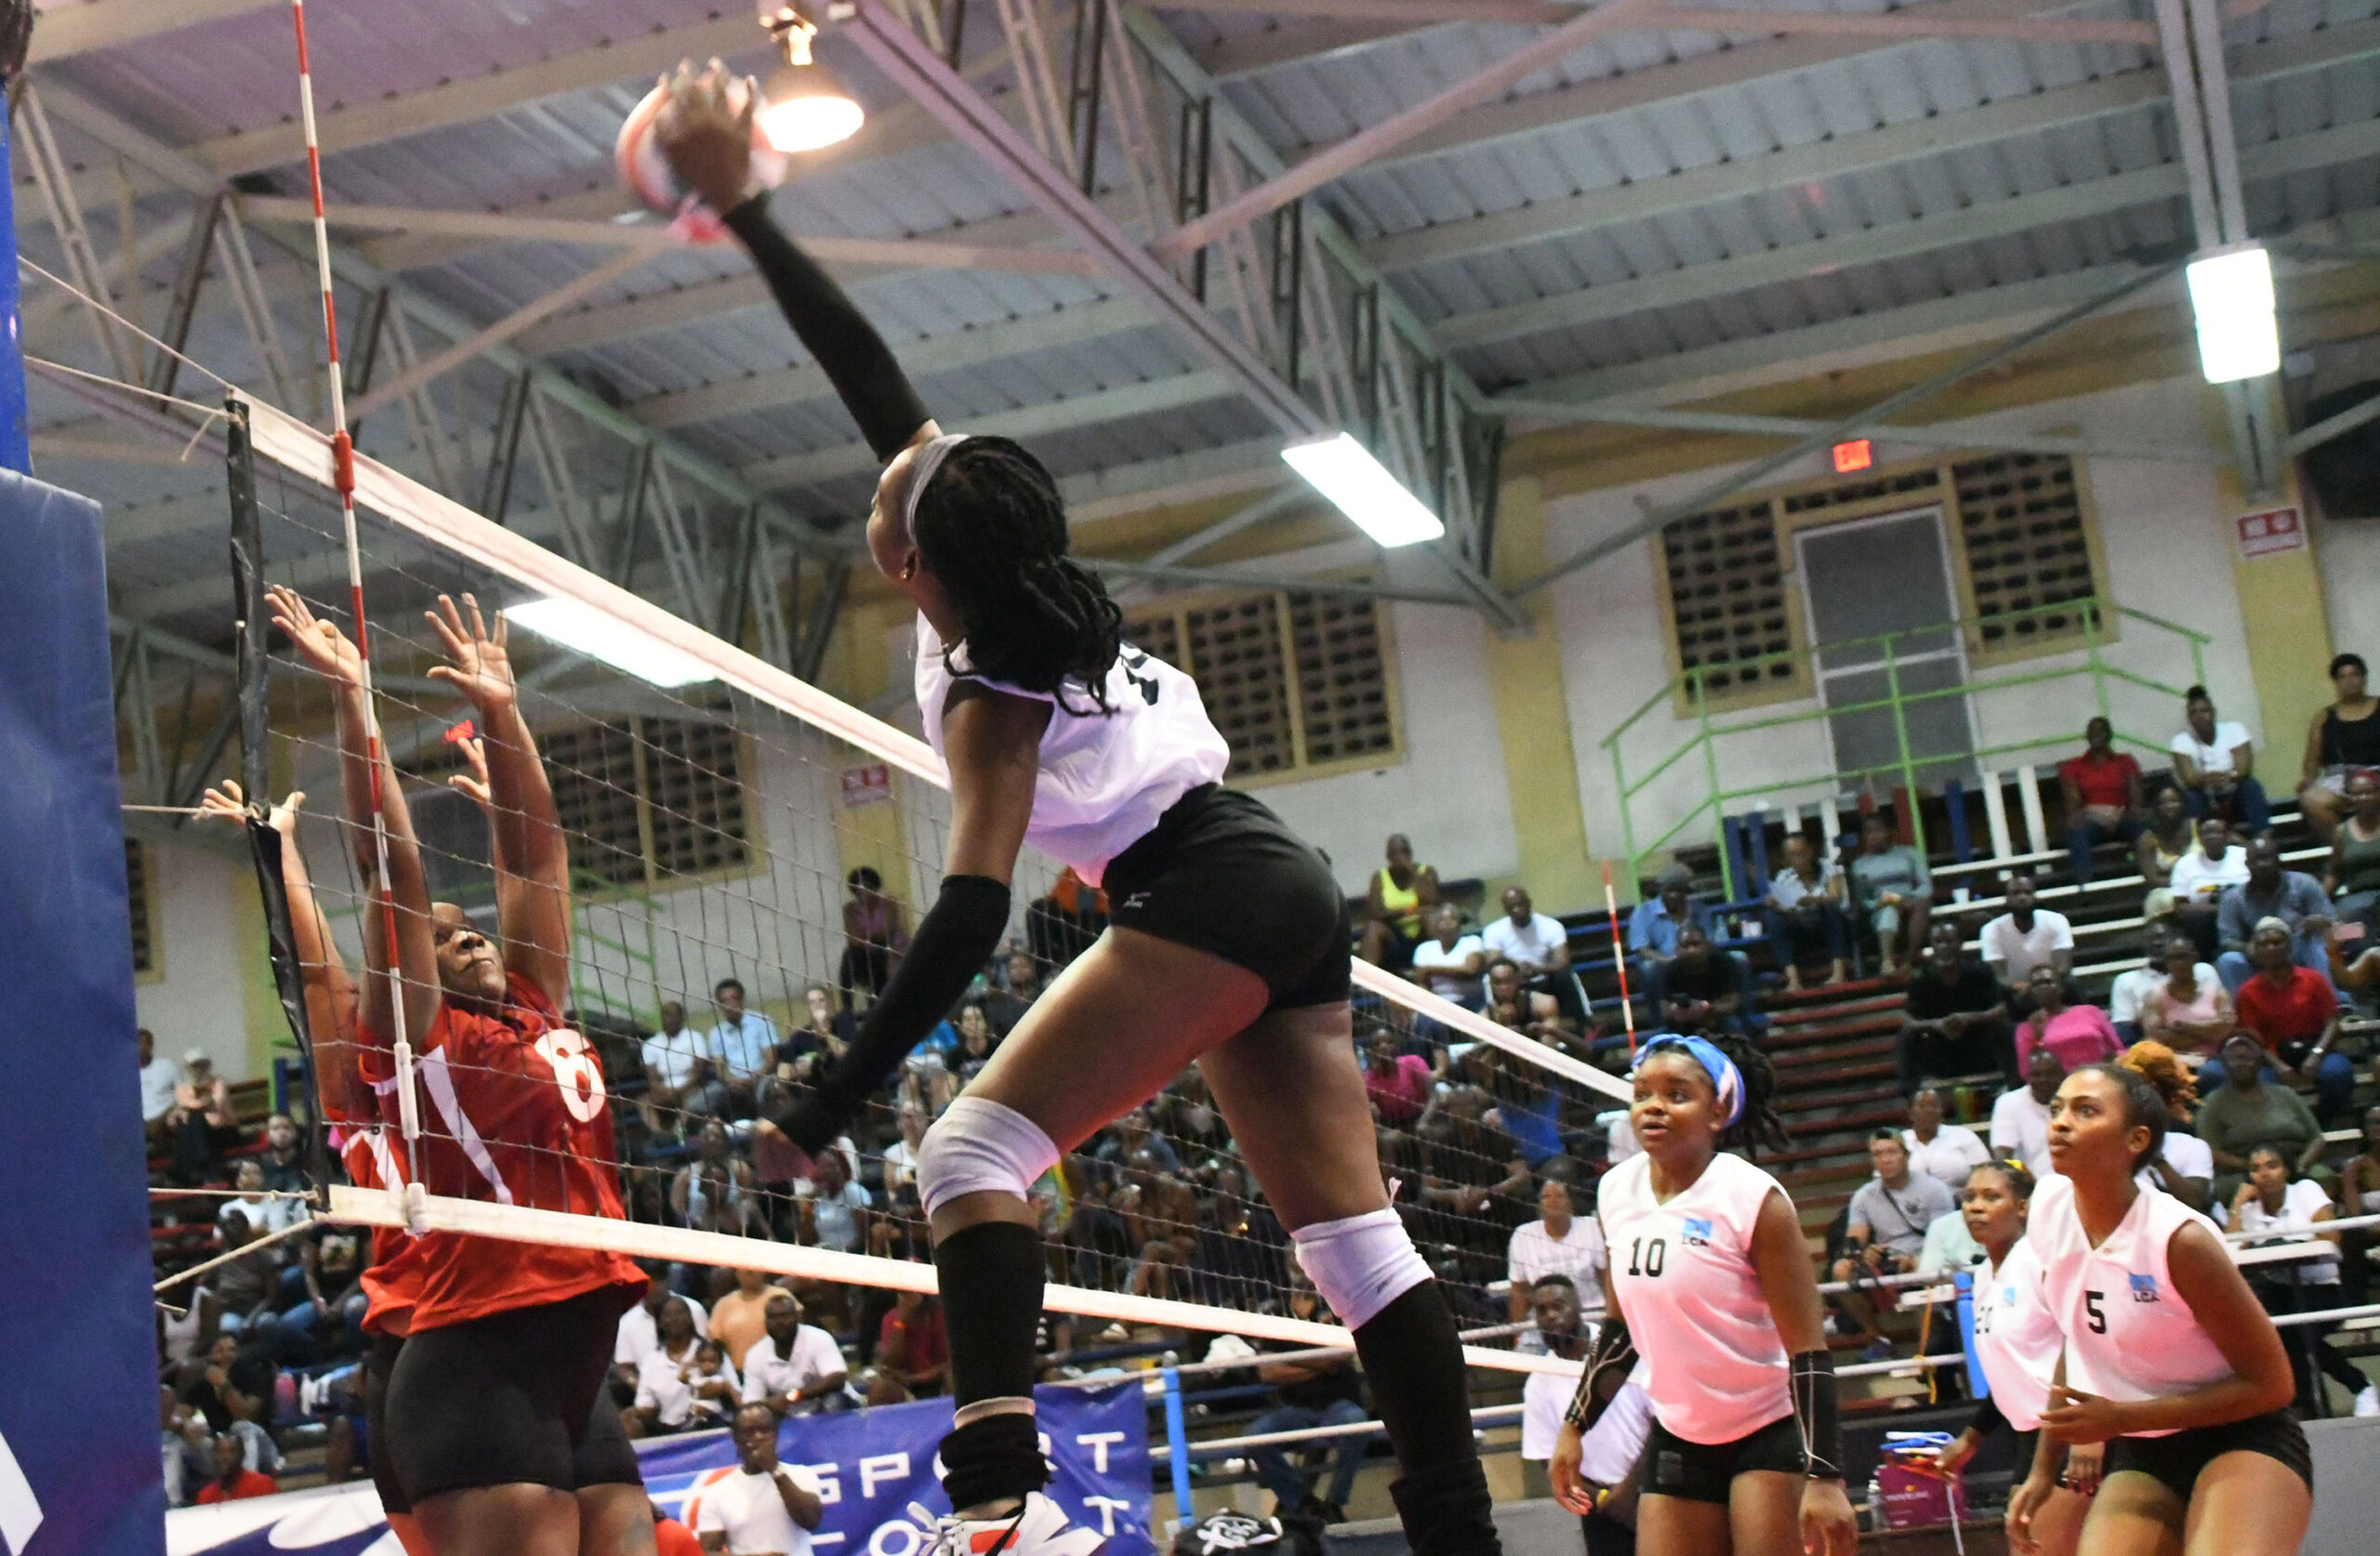 St. Lucia defeats St. Eustatius in straight sets